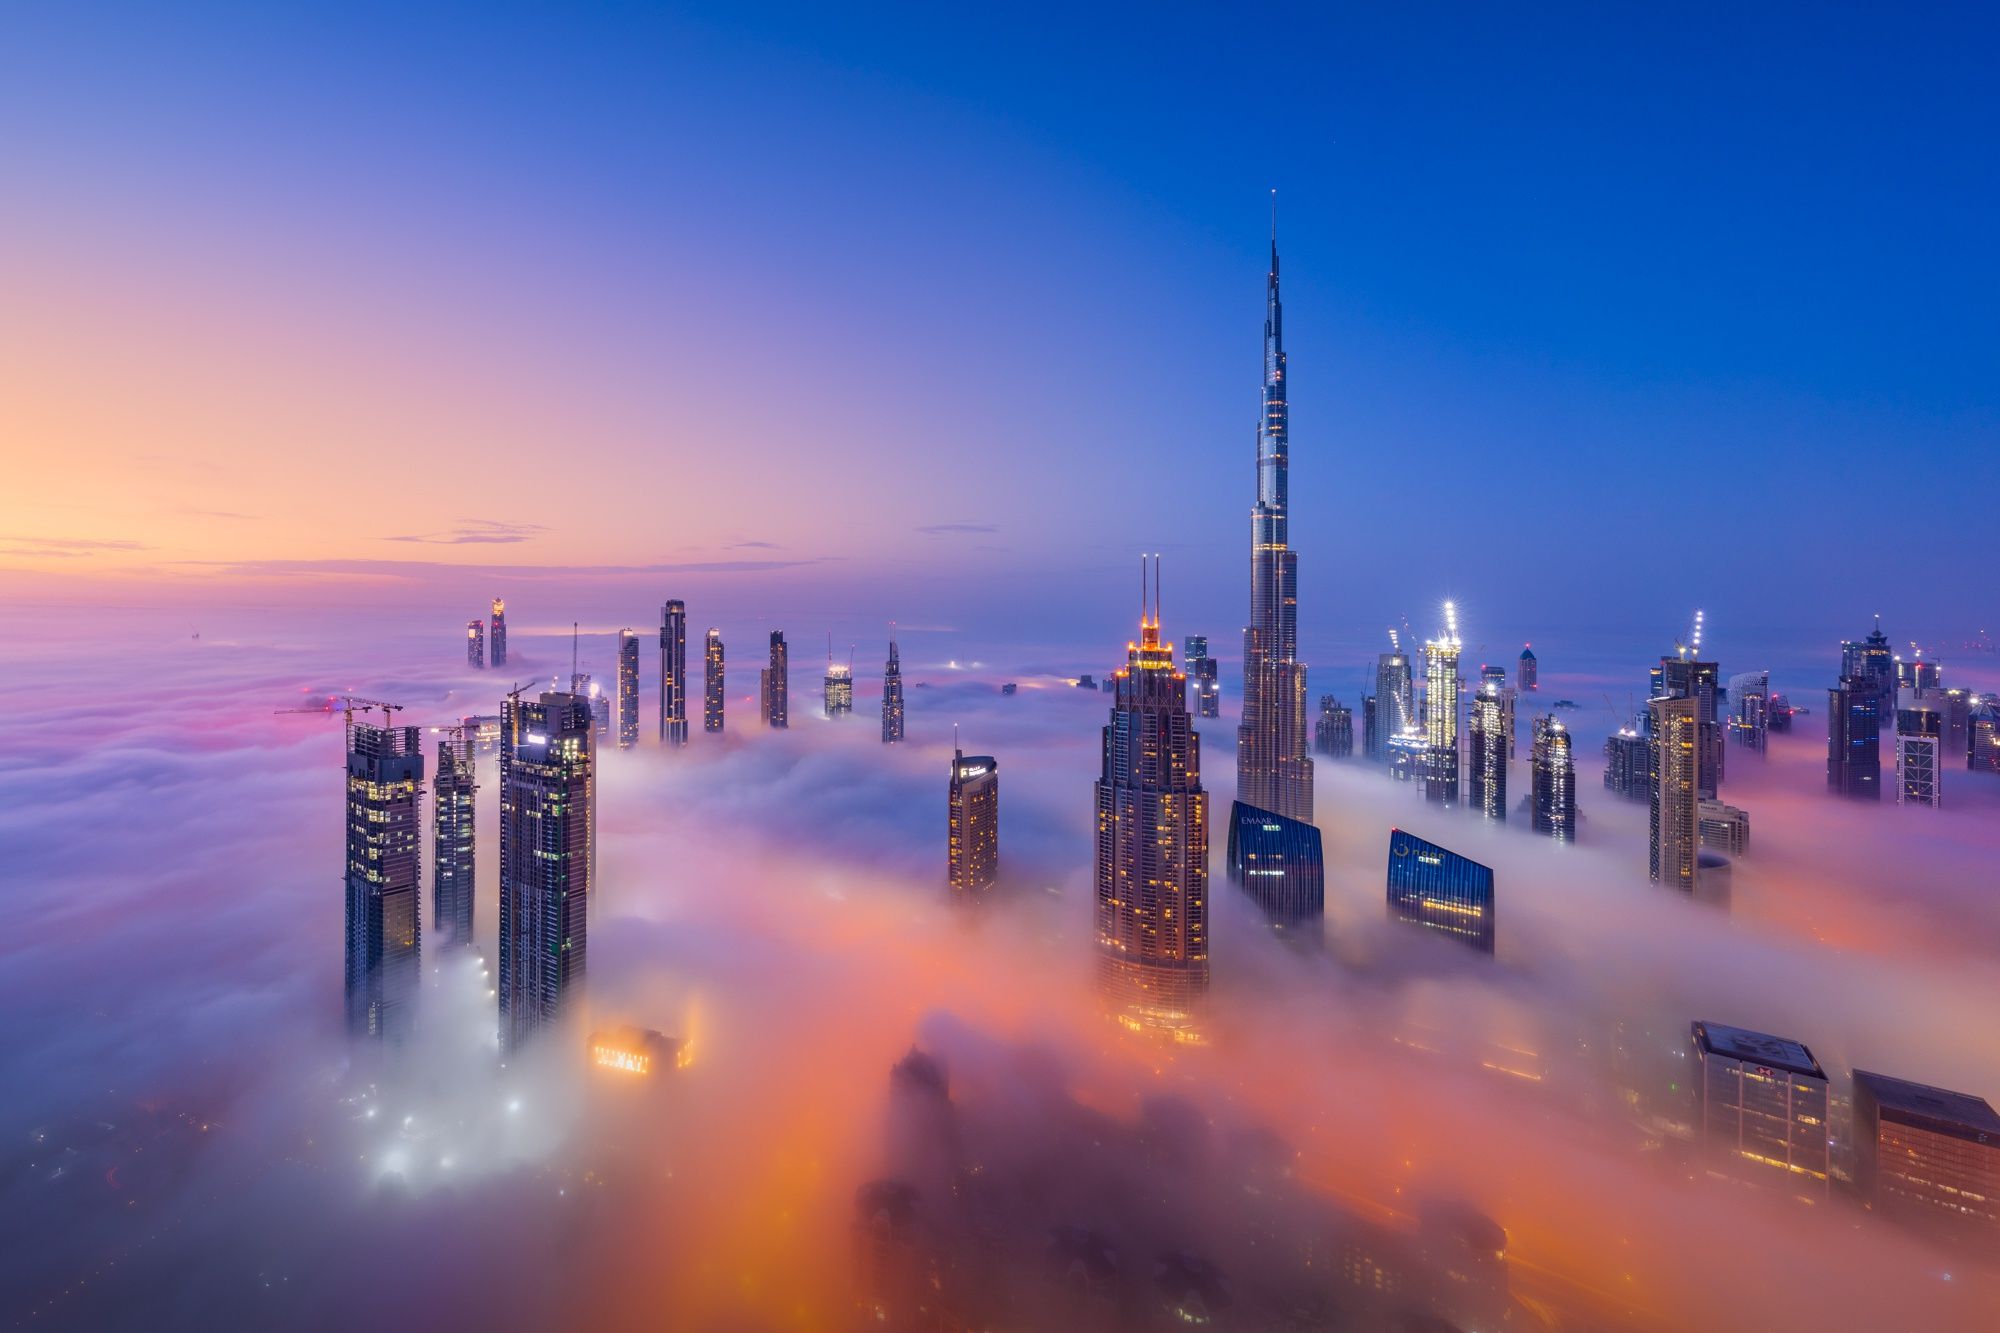 The Burj Khalifa and other buildings in Dubai are seen above the clouds. - Dubai